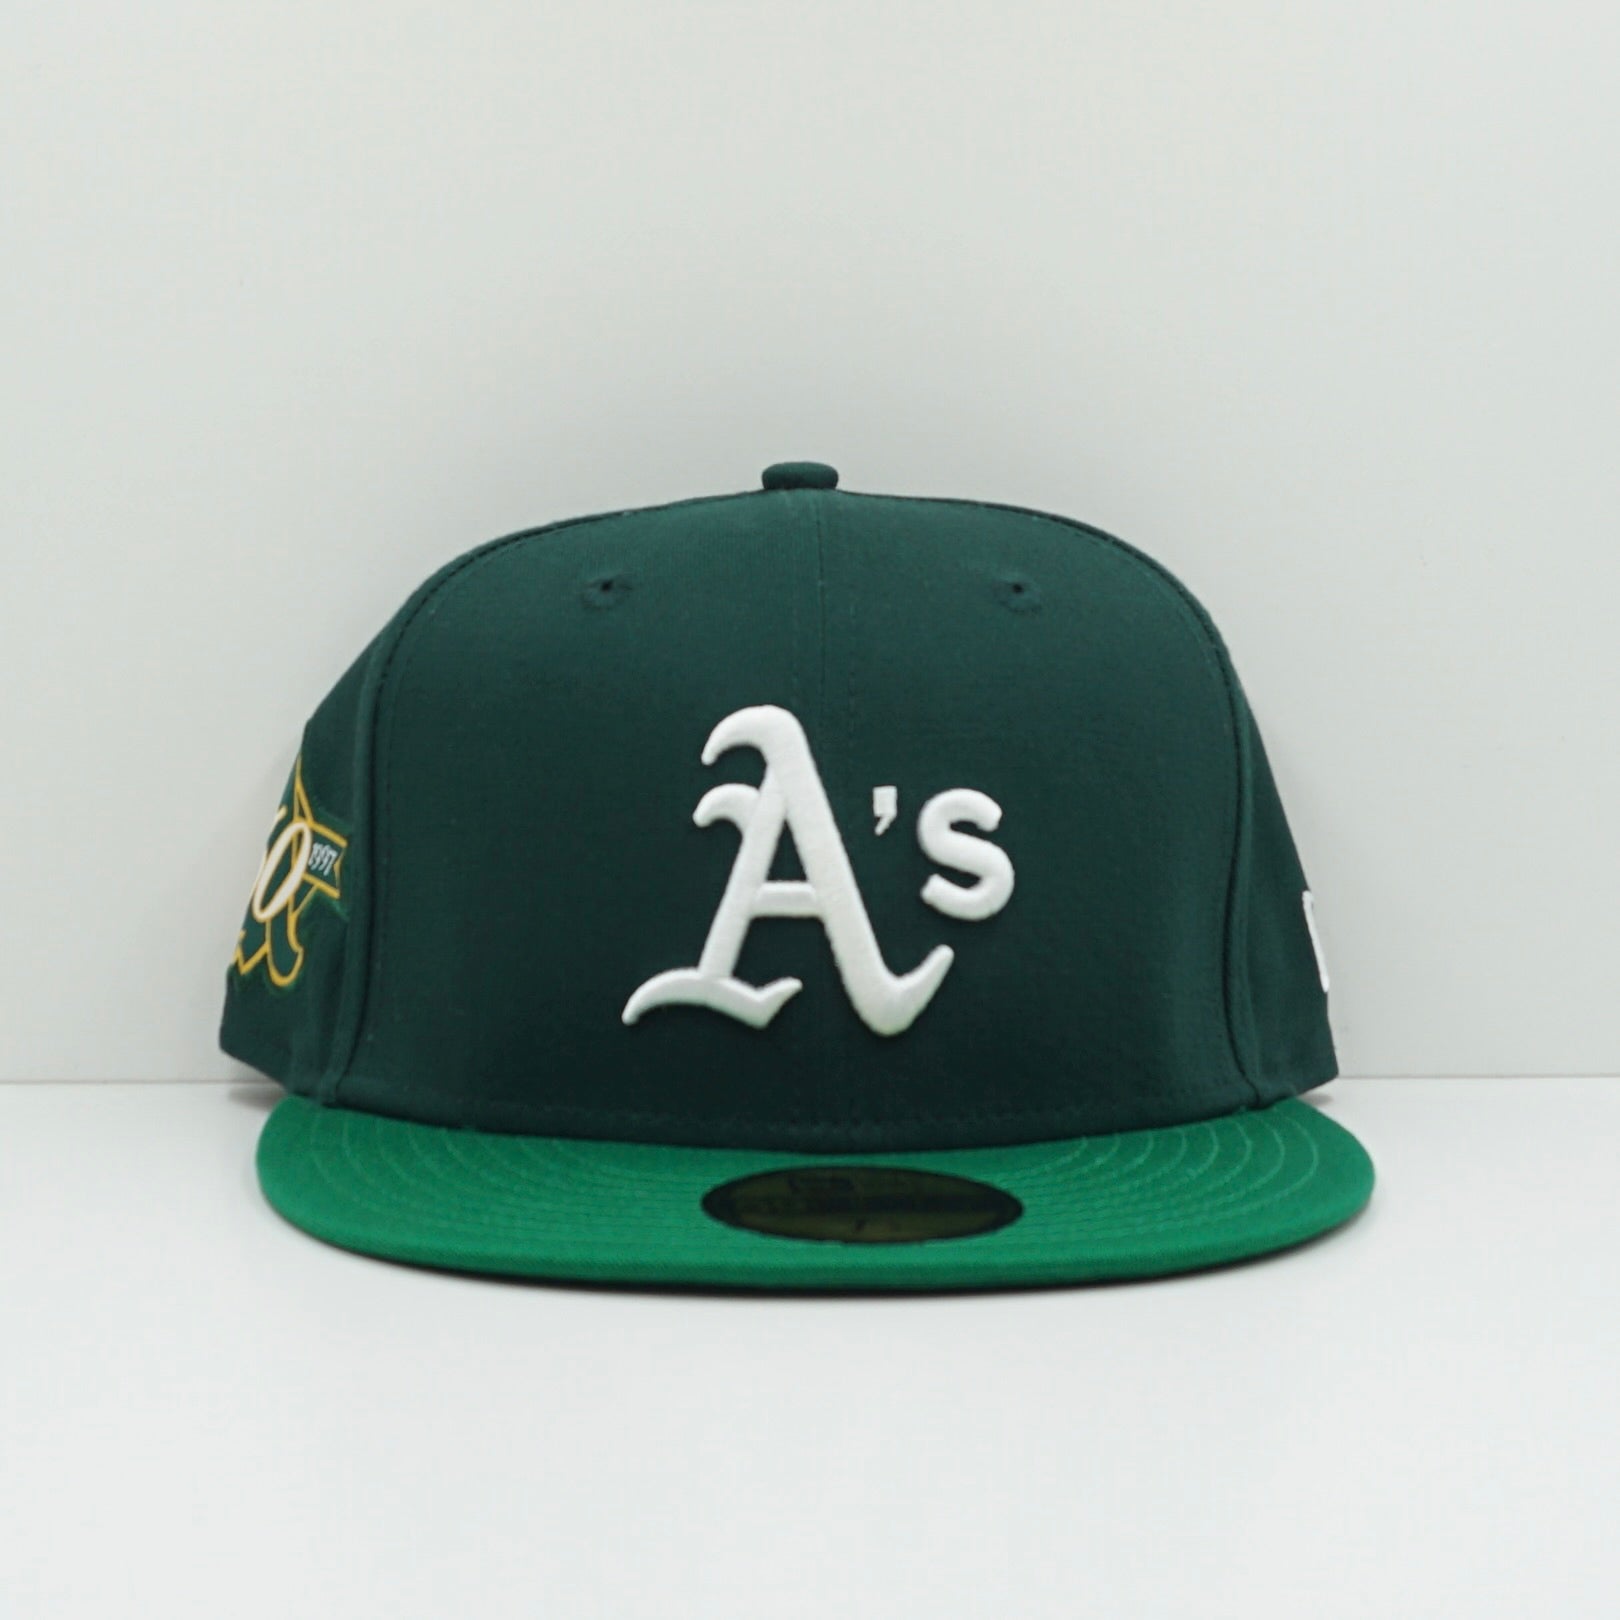 New Era Oakland A's Green Fitted Cap